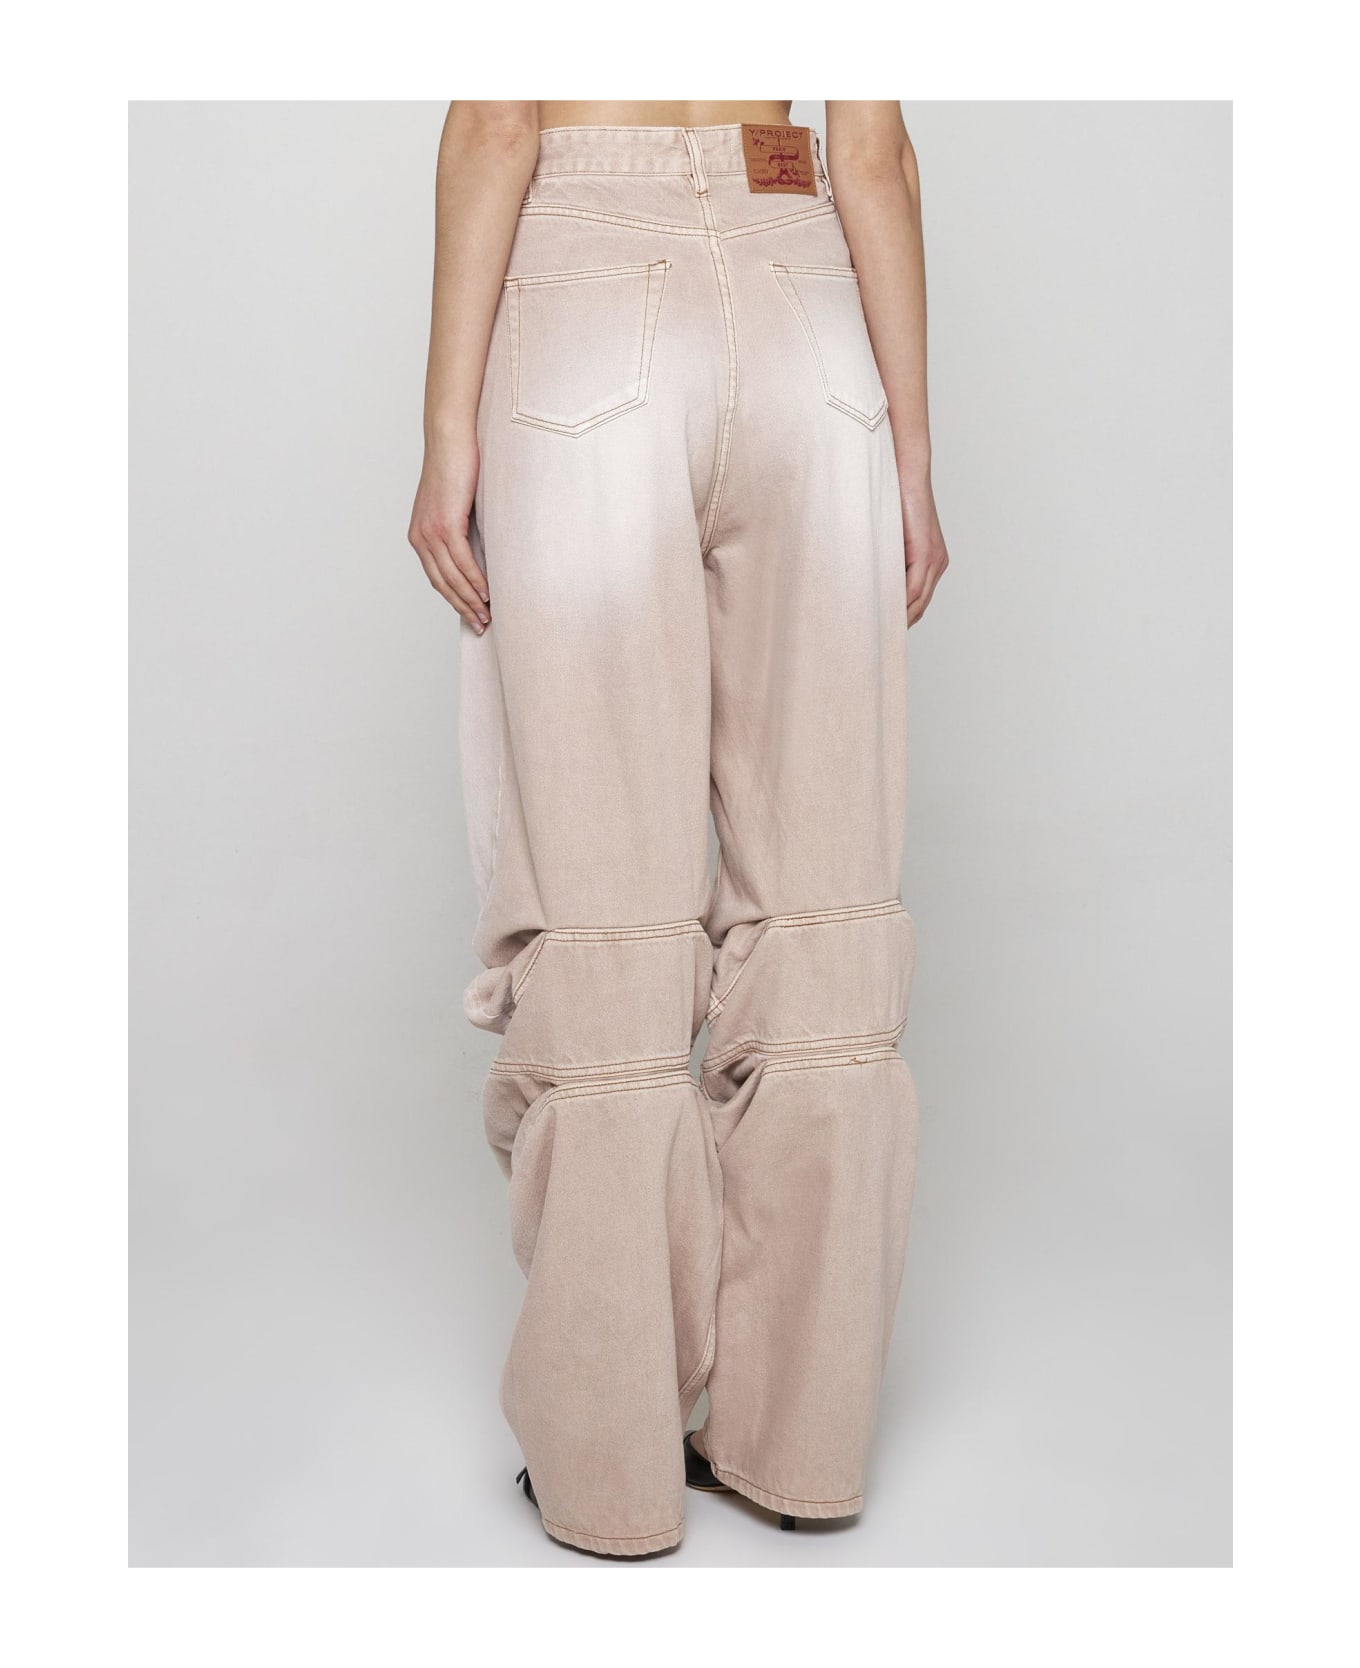 Y/Project Draped Cuff Jeans - Pink